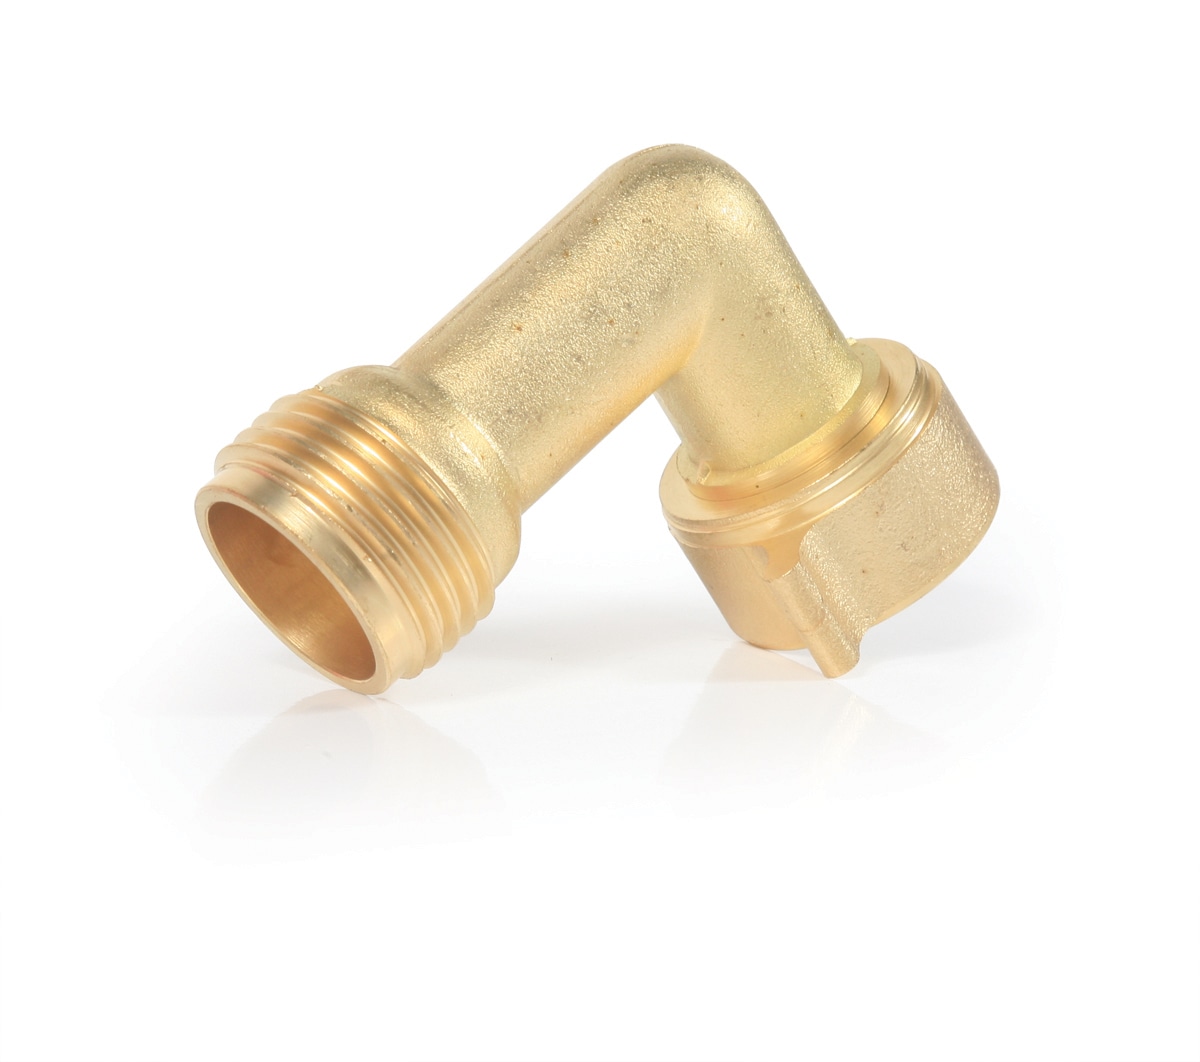 CAMCO Brass Garden Hose Quick Connectors - 90 Degree Elbow with Gripper,  Rust Resistant, Female/Male Fitting - Prevents Hose-Crimping and Strain in  the Garden Hose Quick Connectors department at